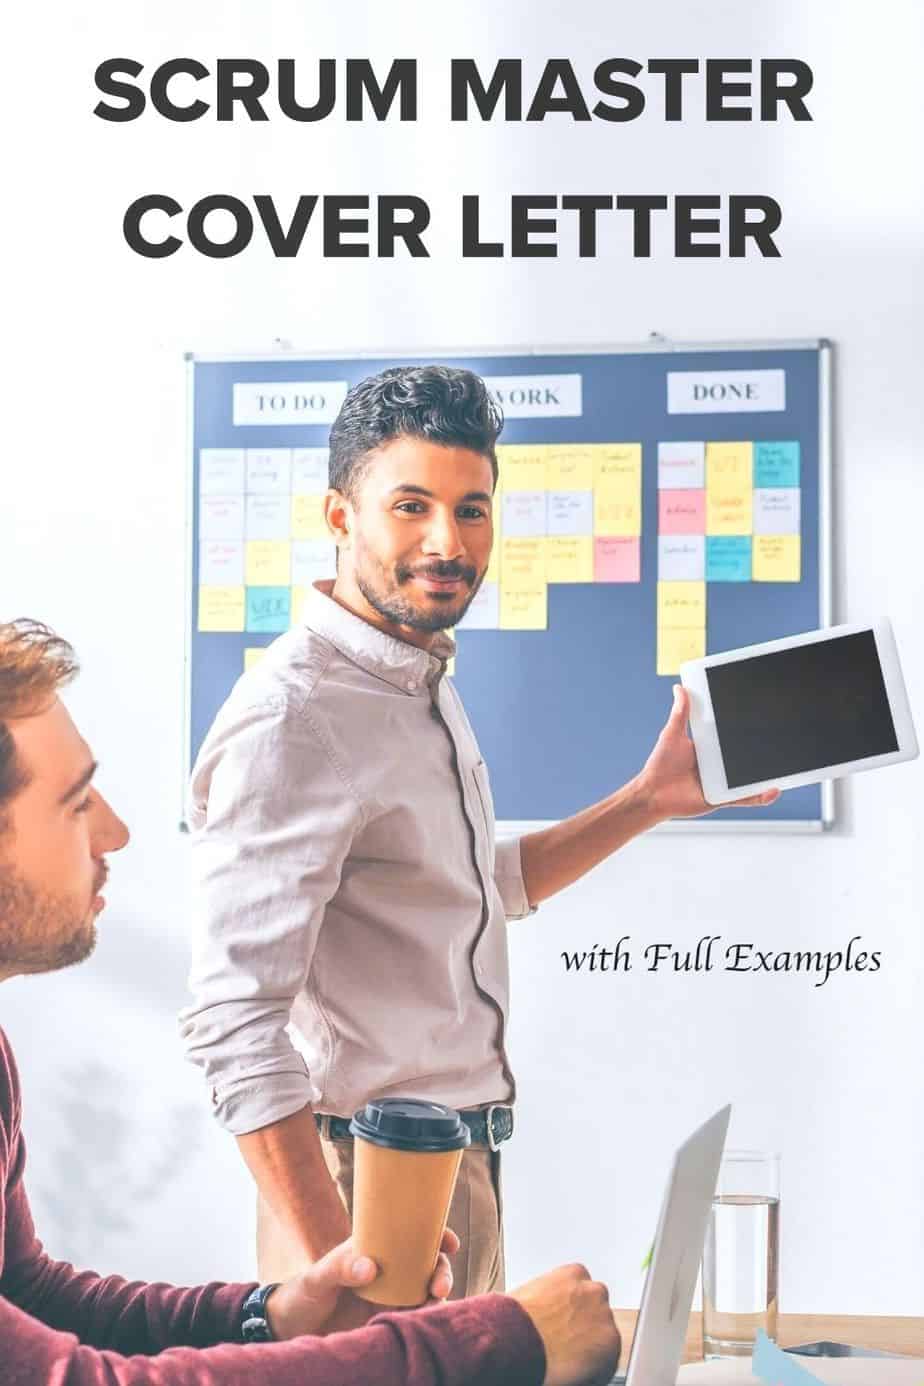 Scrum Master Cover Letter Writing